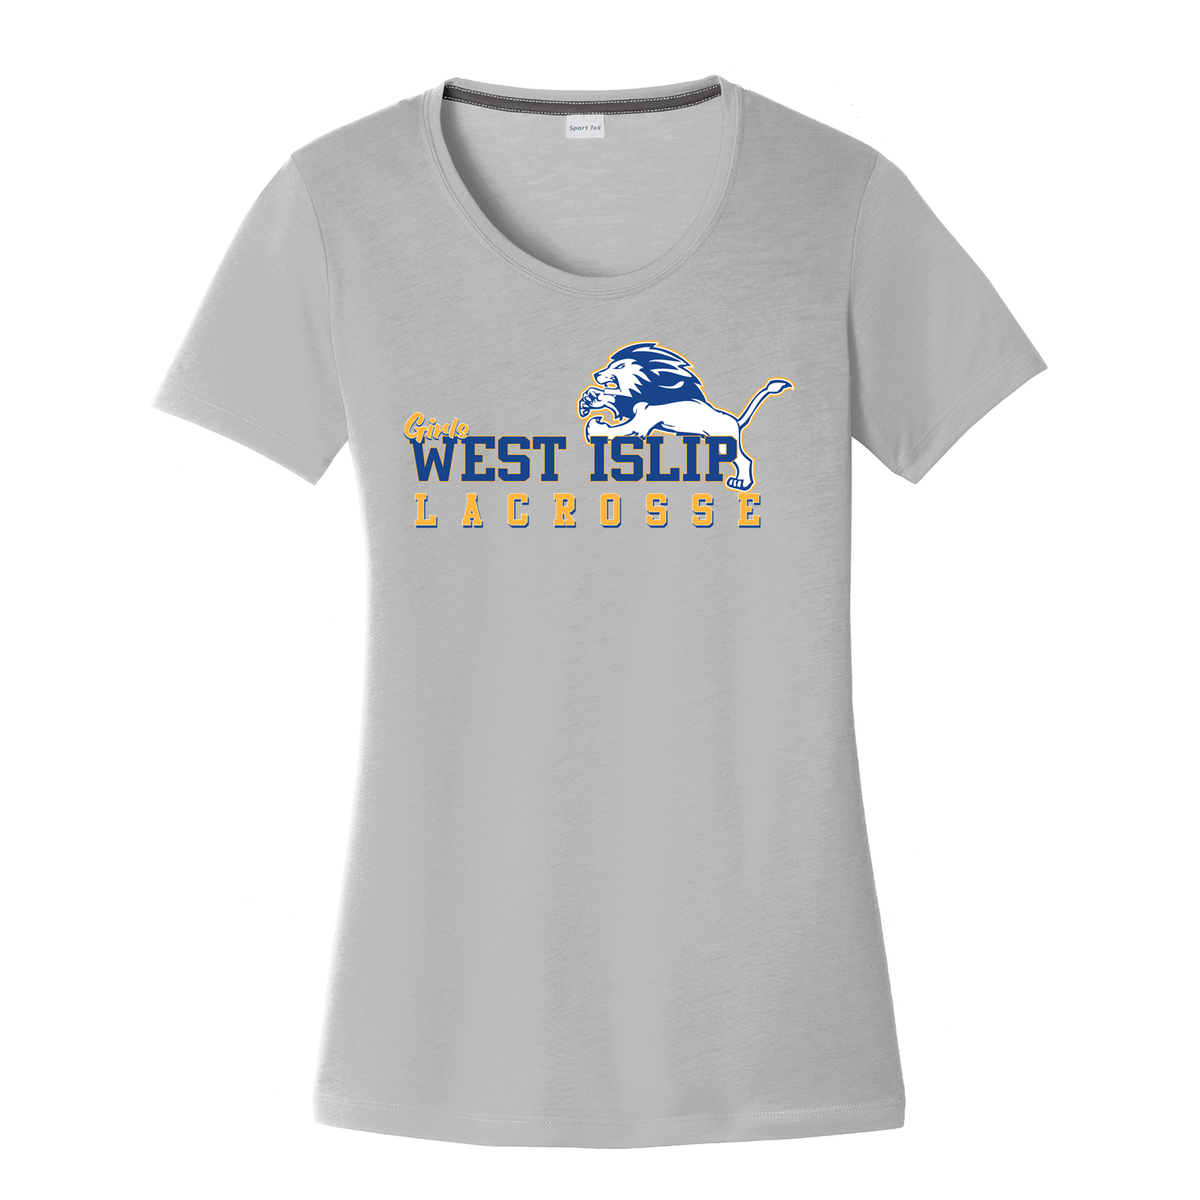 West Islip Girls Youth Lacrosse  Women's CottonTouch Performance T-Shirt